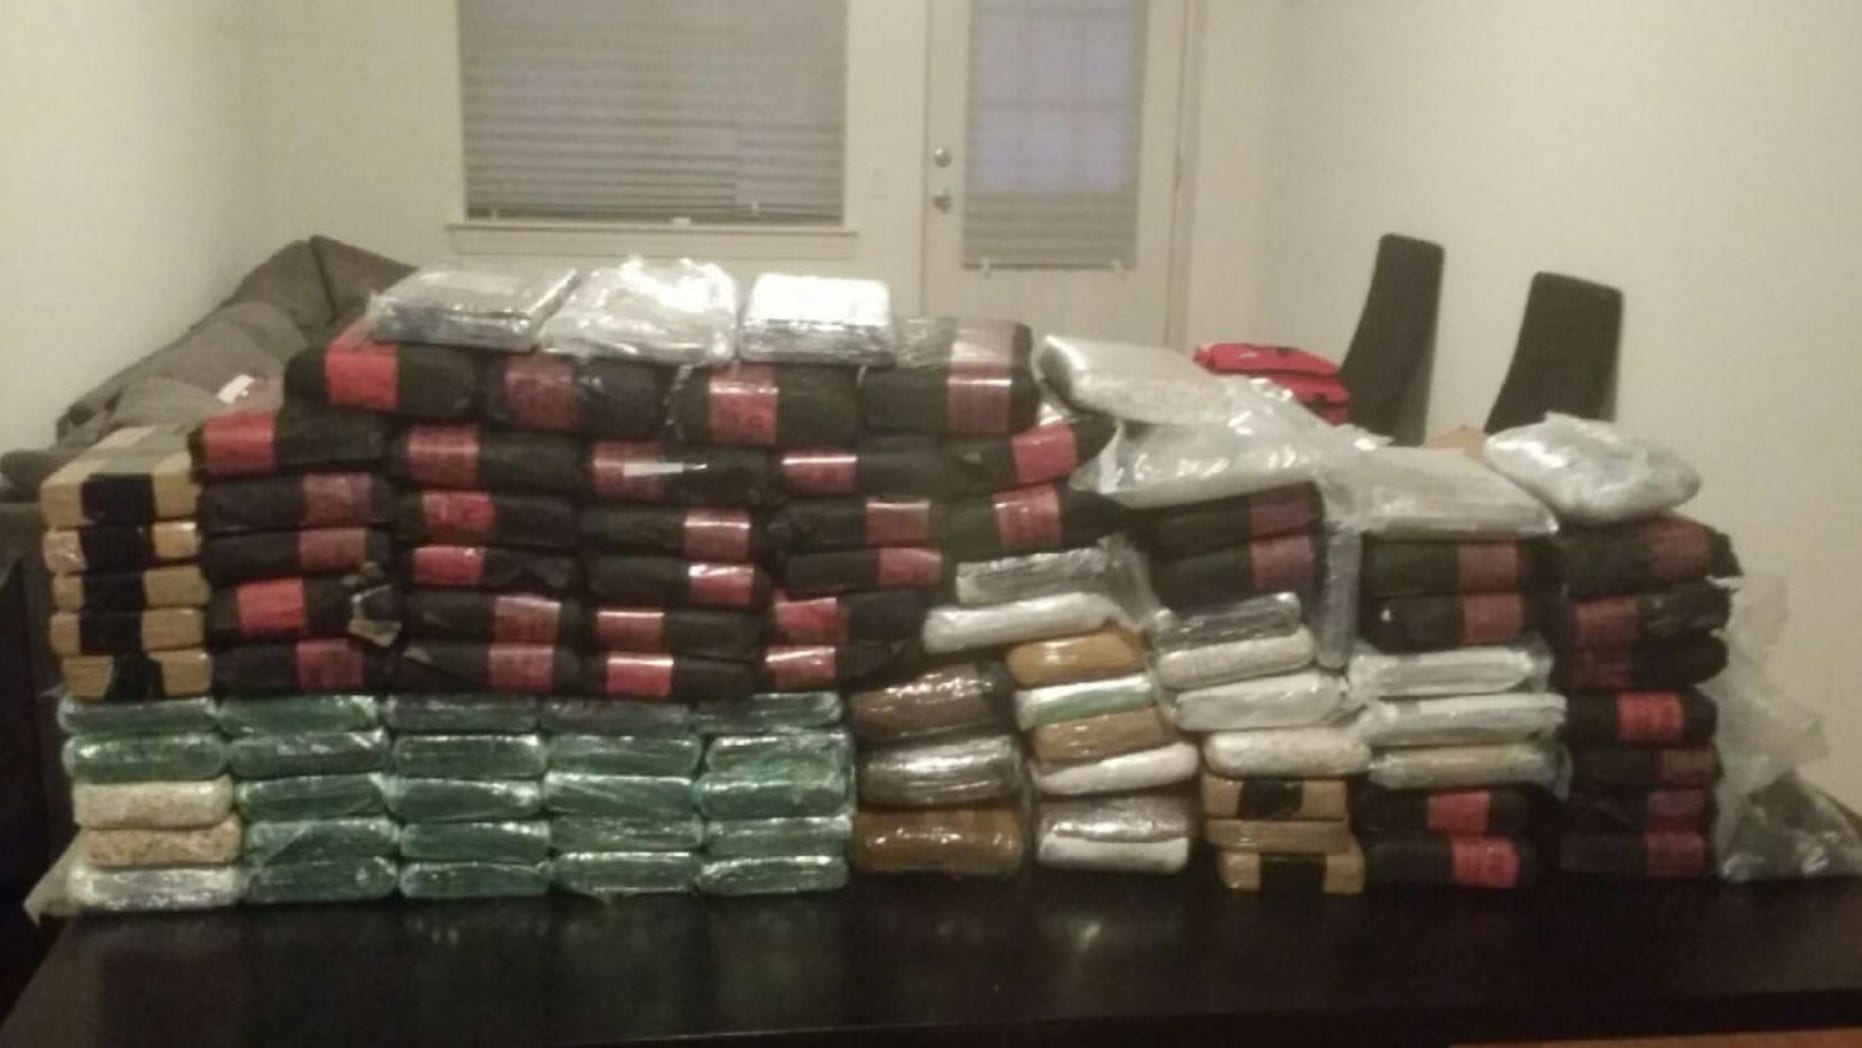 Nyc Authorities Seize Nearly 200 Pounds Of Fentanyl Worth 30 Million